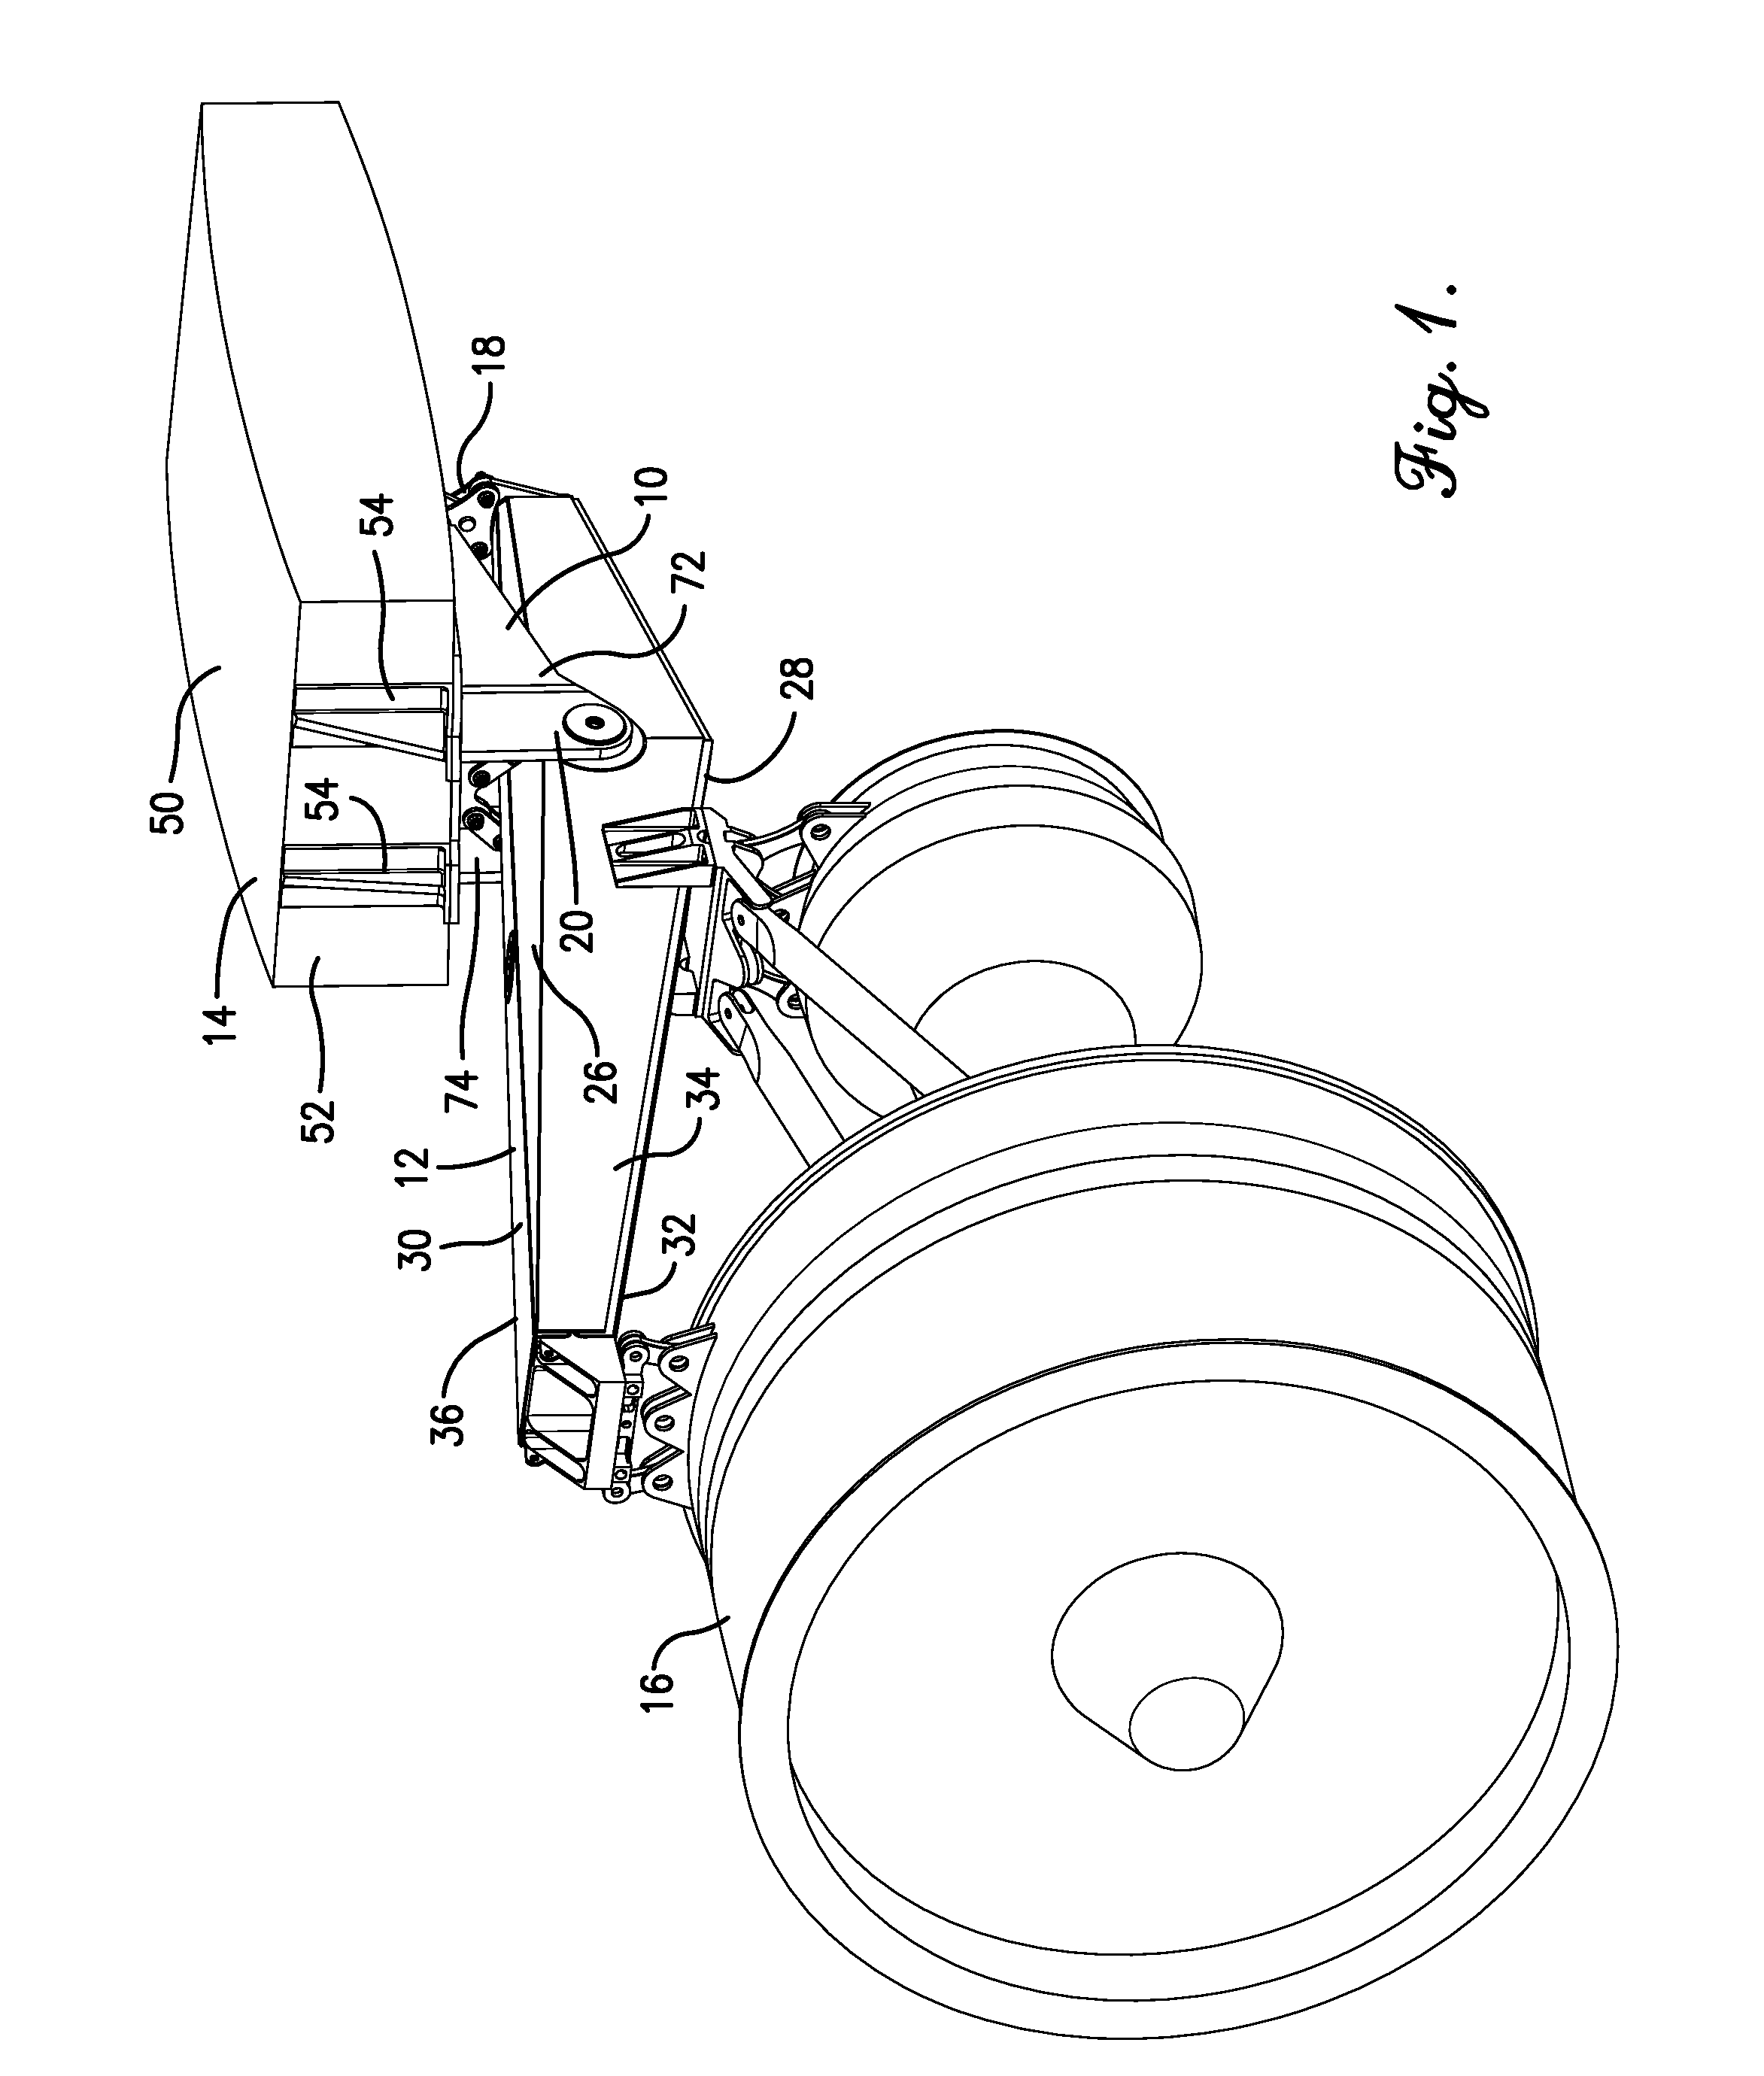 Method for mounting a pylon to an aircraft